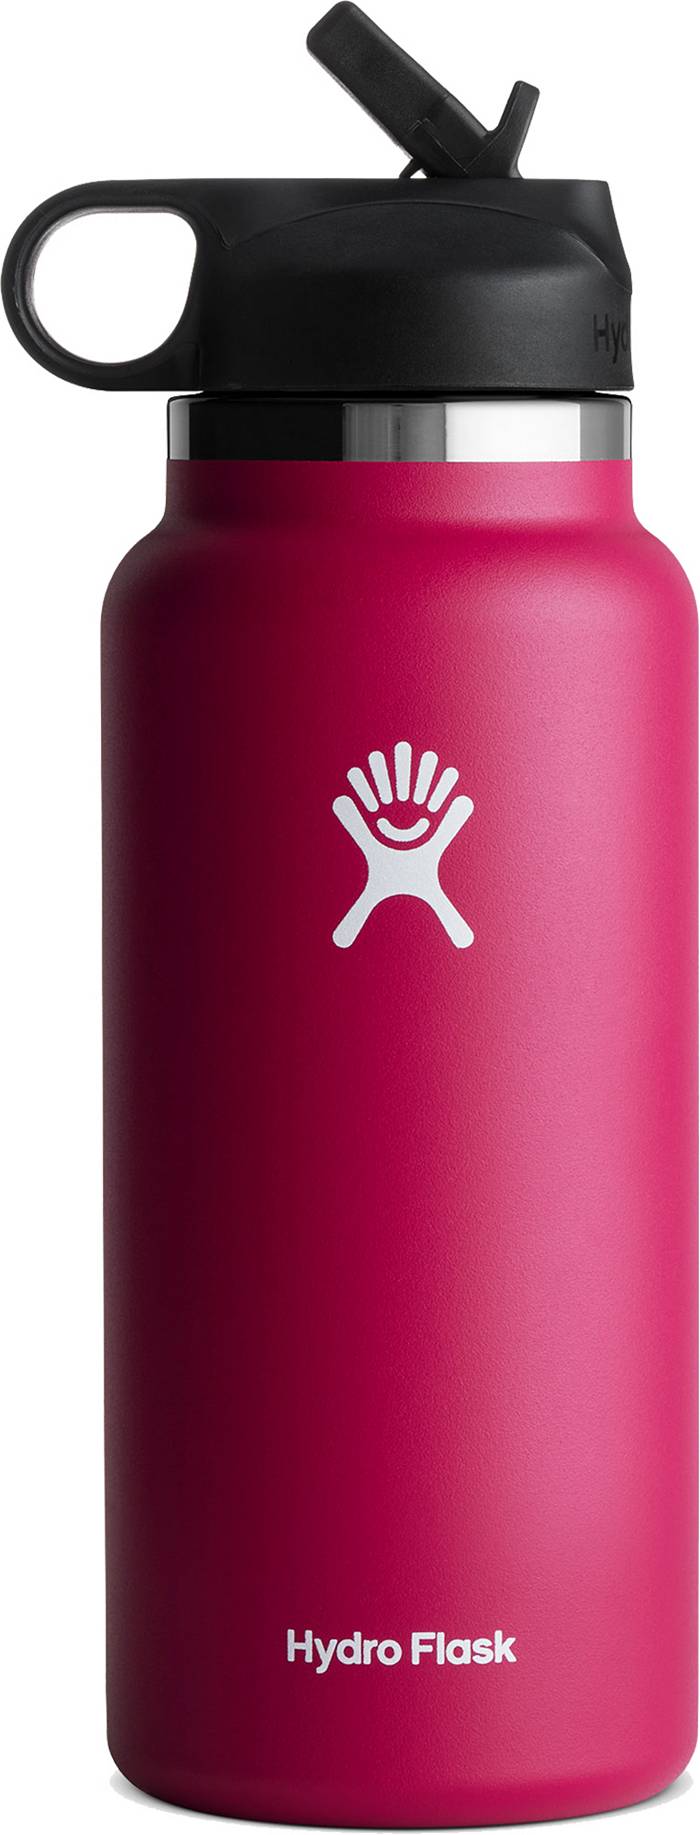 Hydro Flask Wide Mouth 32 oz. Bottle with Straw Lid